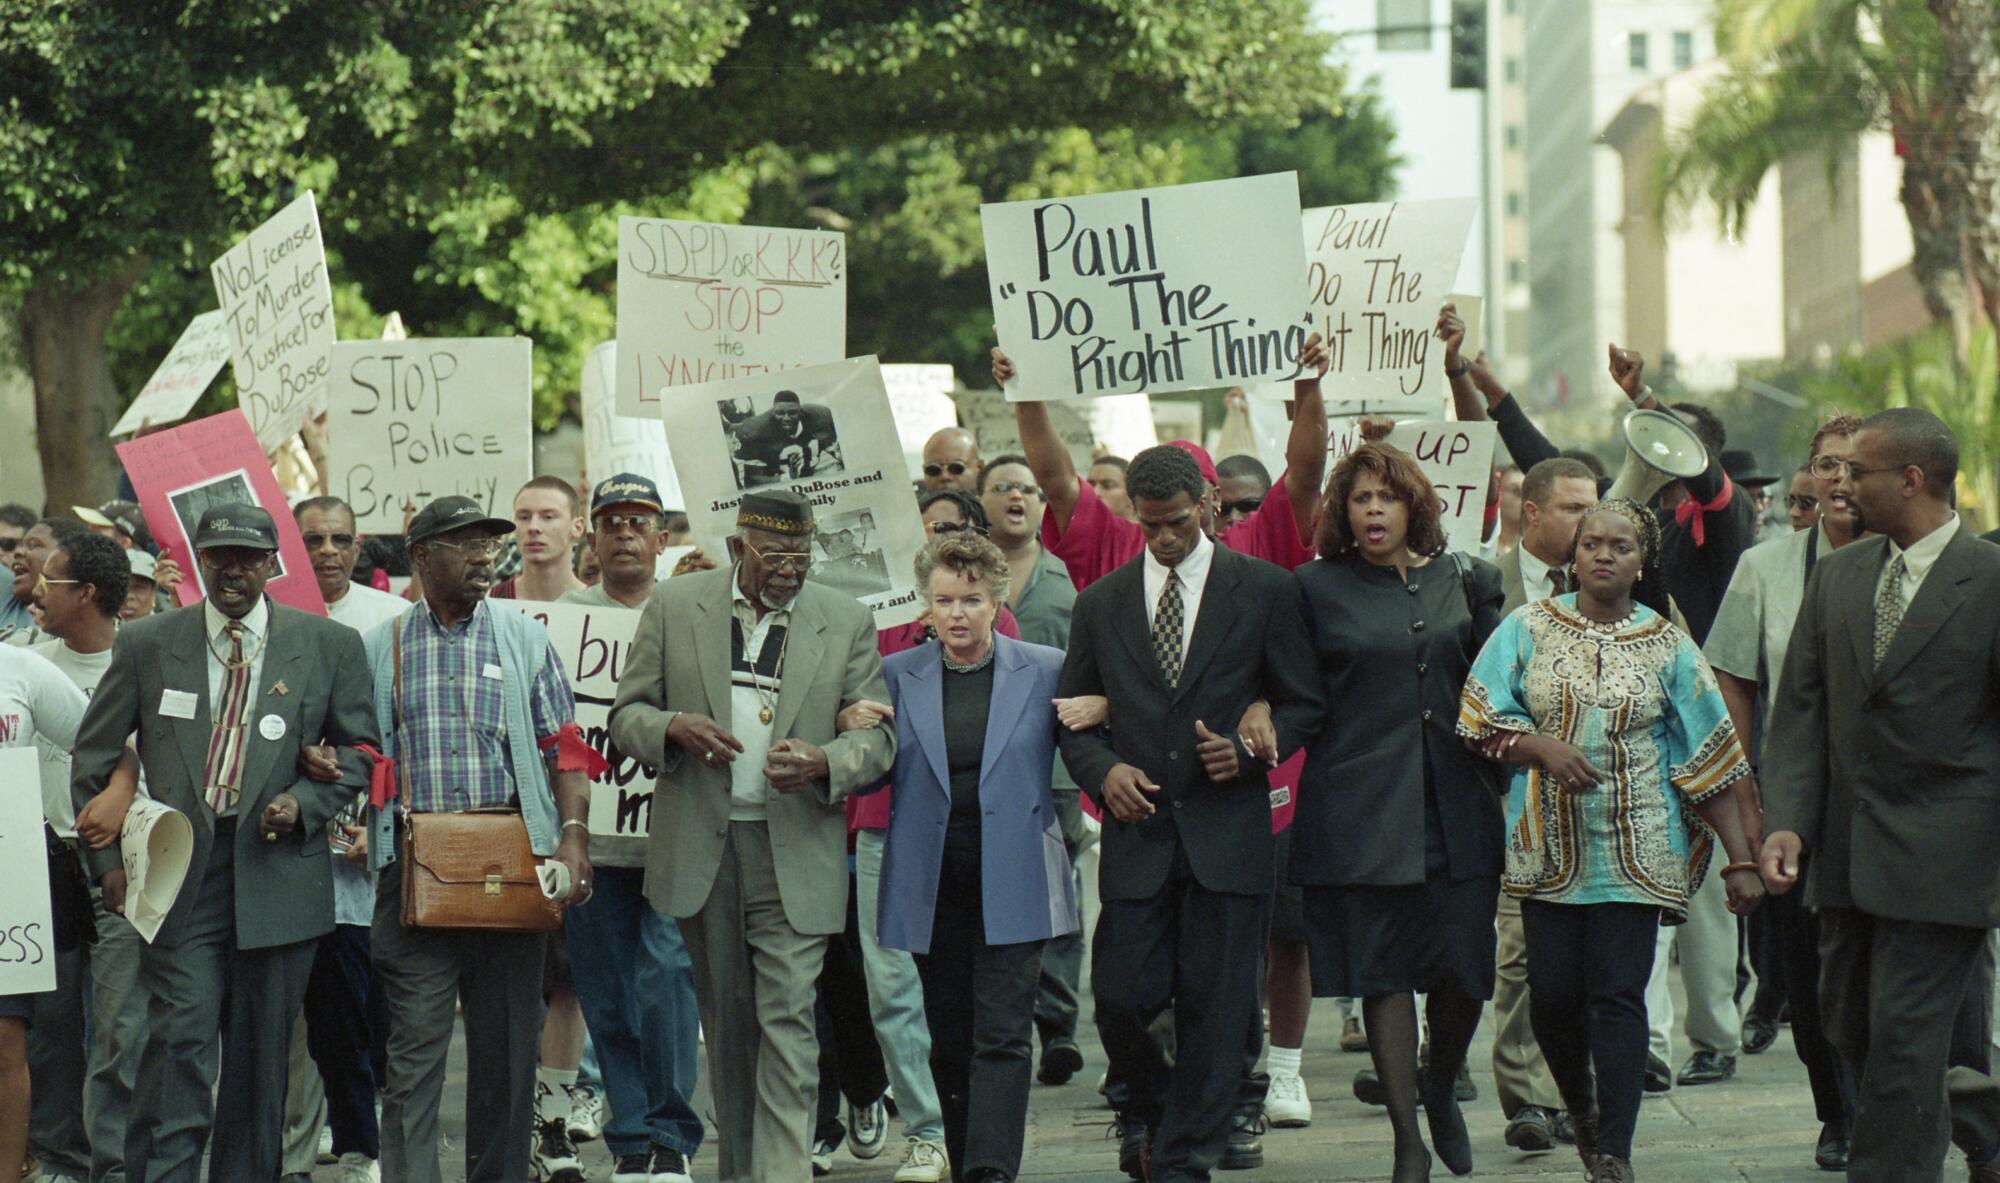 Scenes of a vigil and protest of the fatal police shooting of Demetrius DuBois in 1999